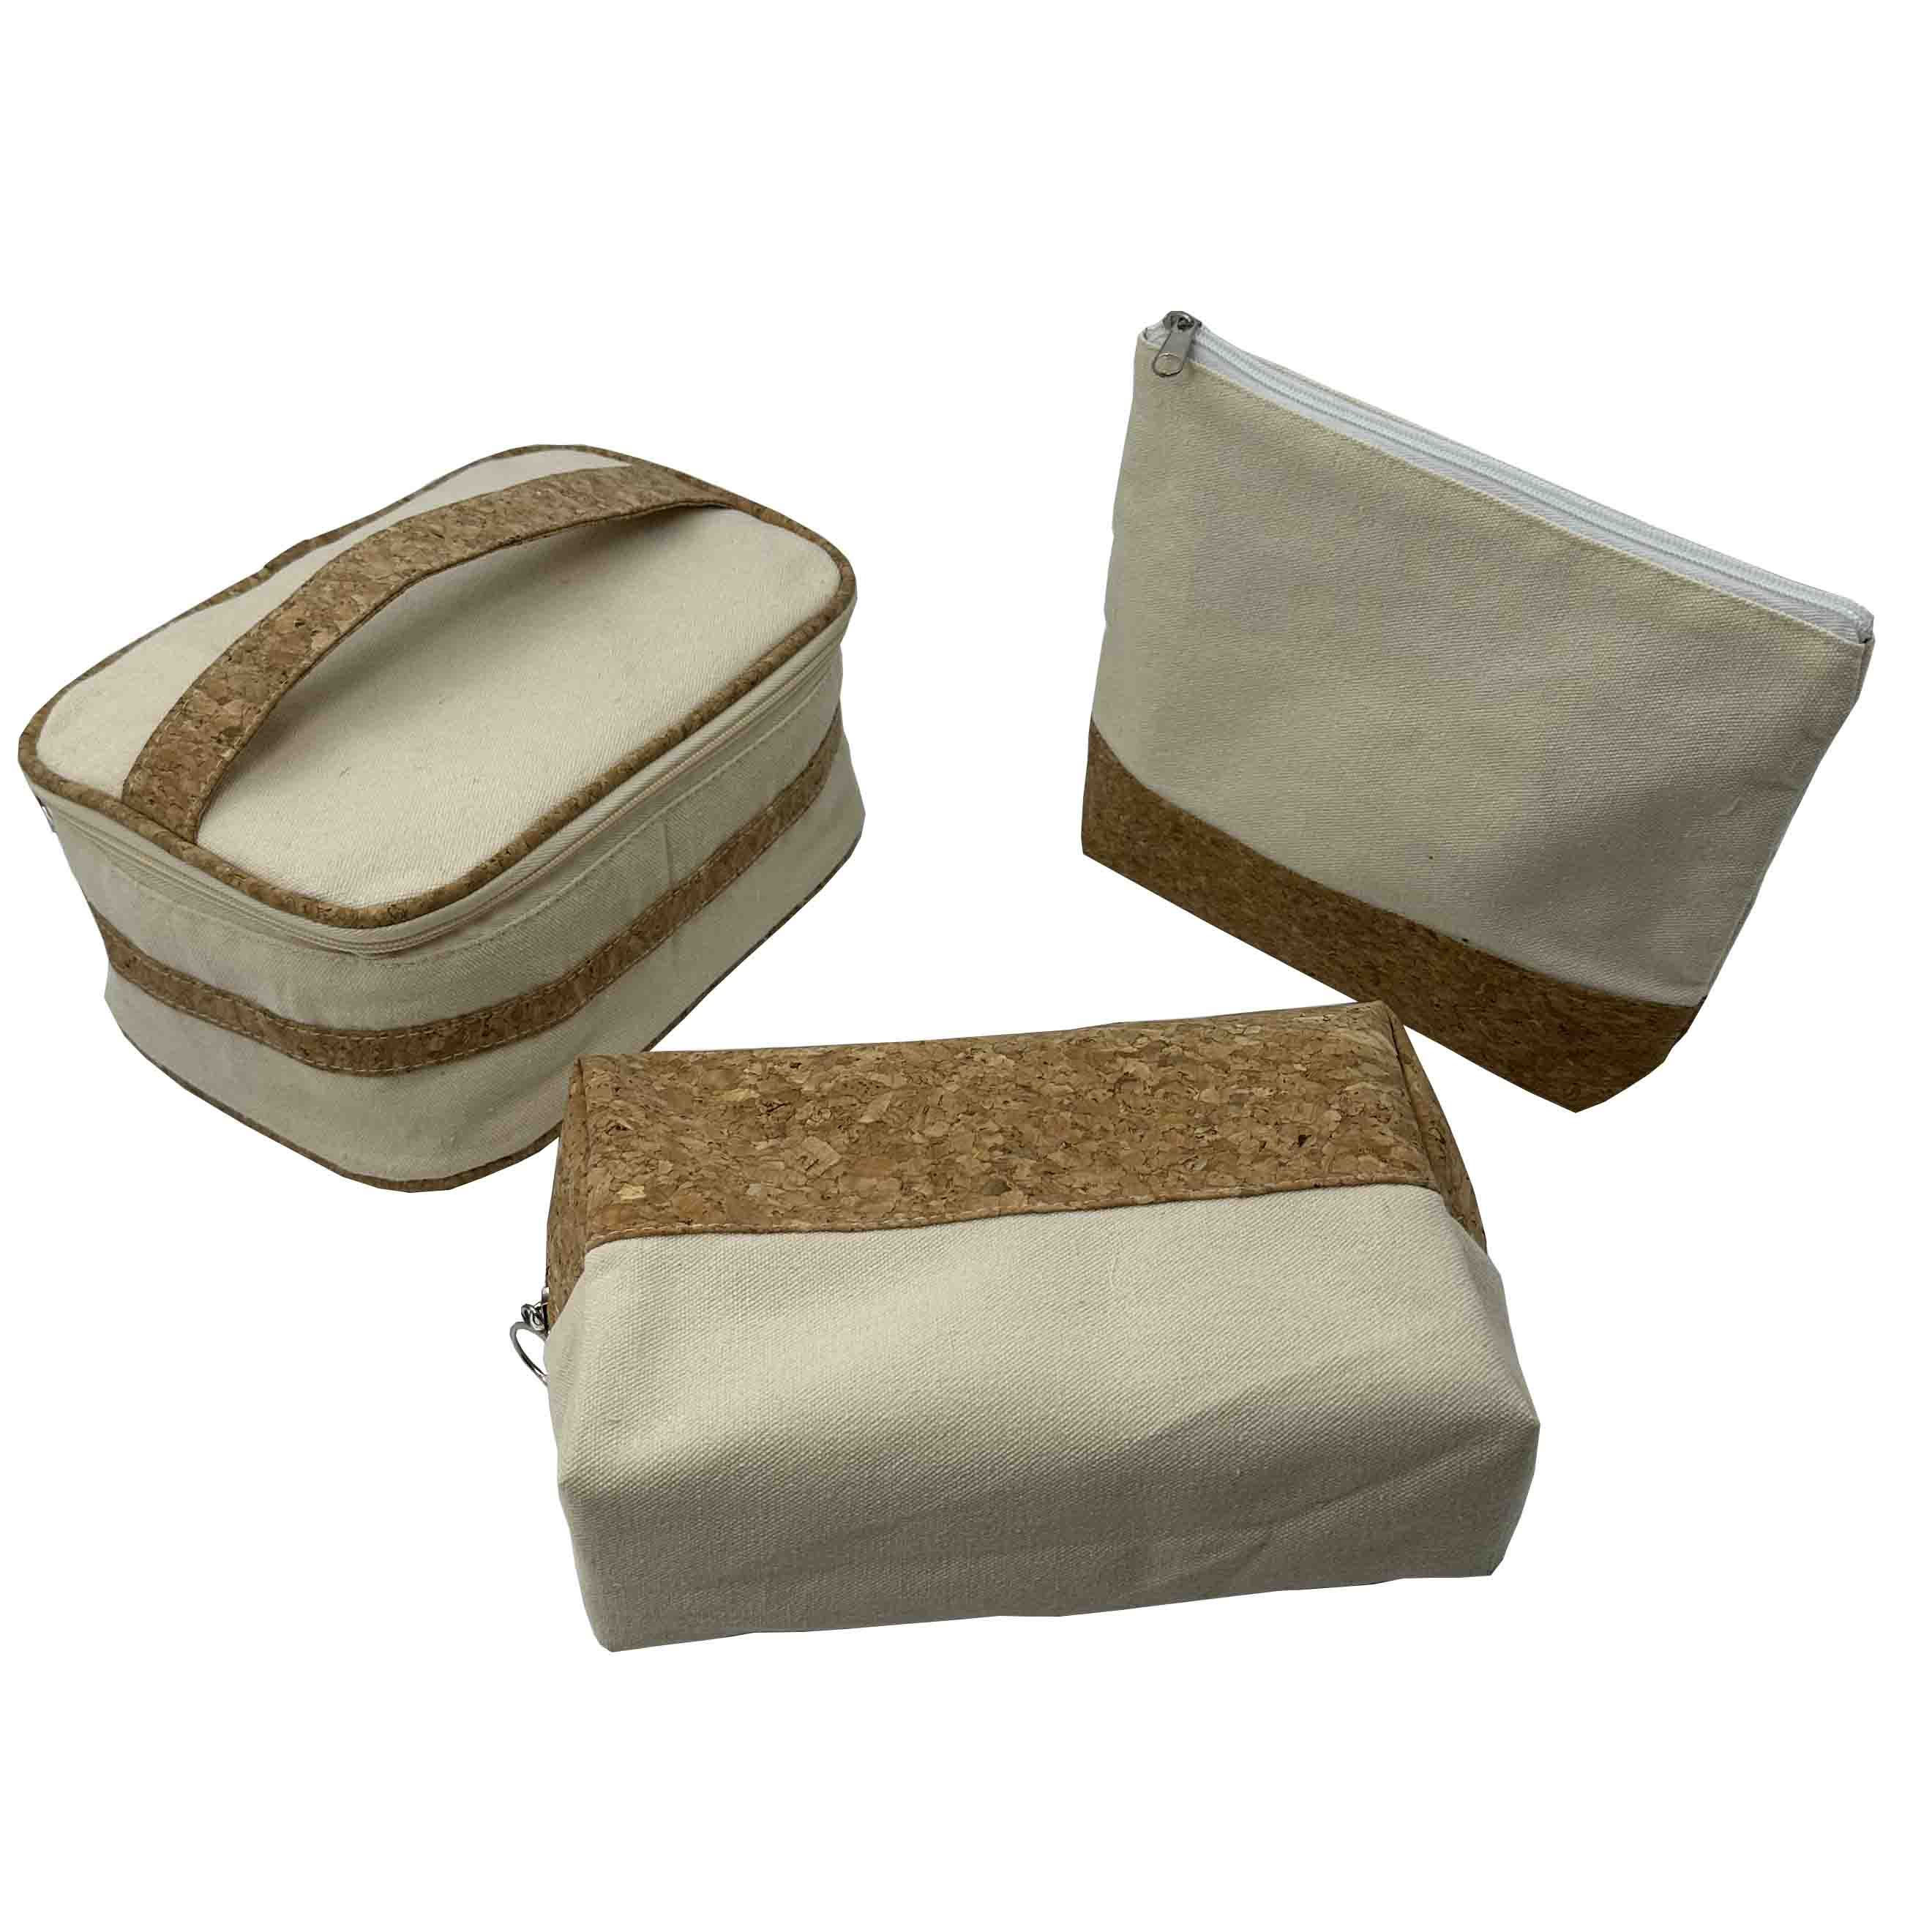 Travel First Aid Kit small Bag for Medical China